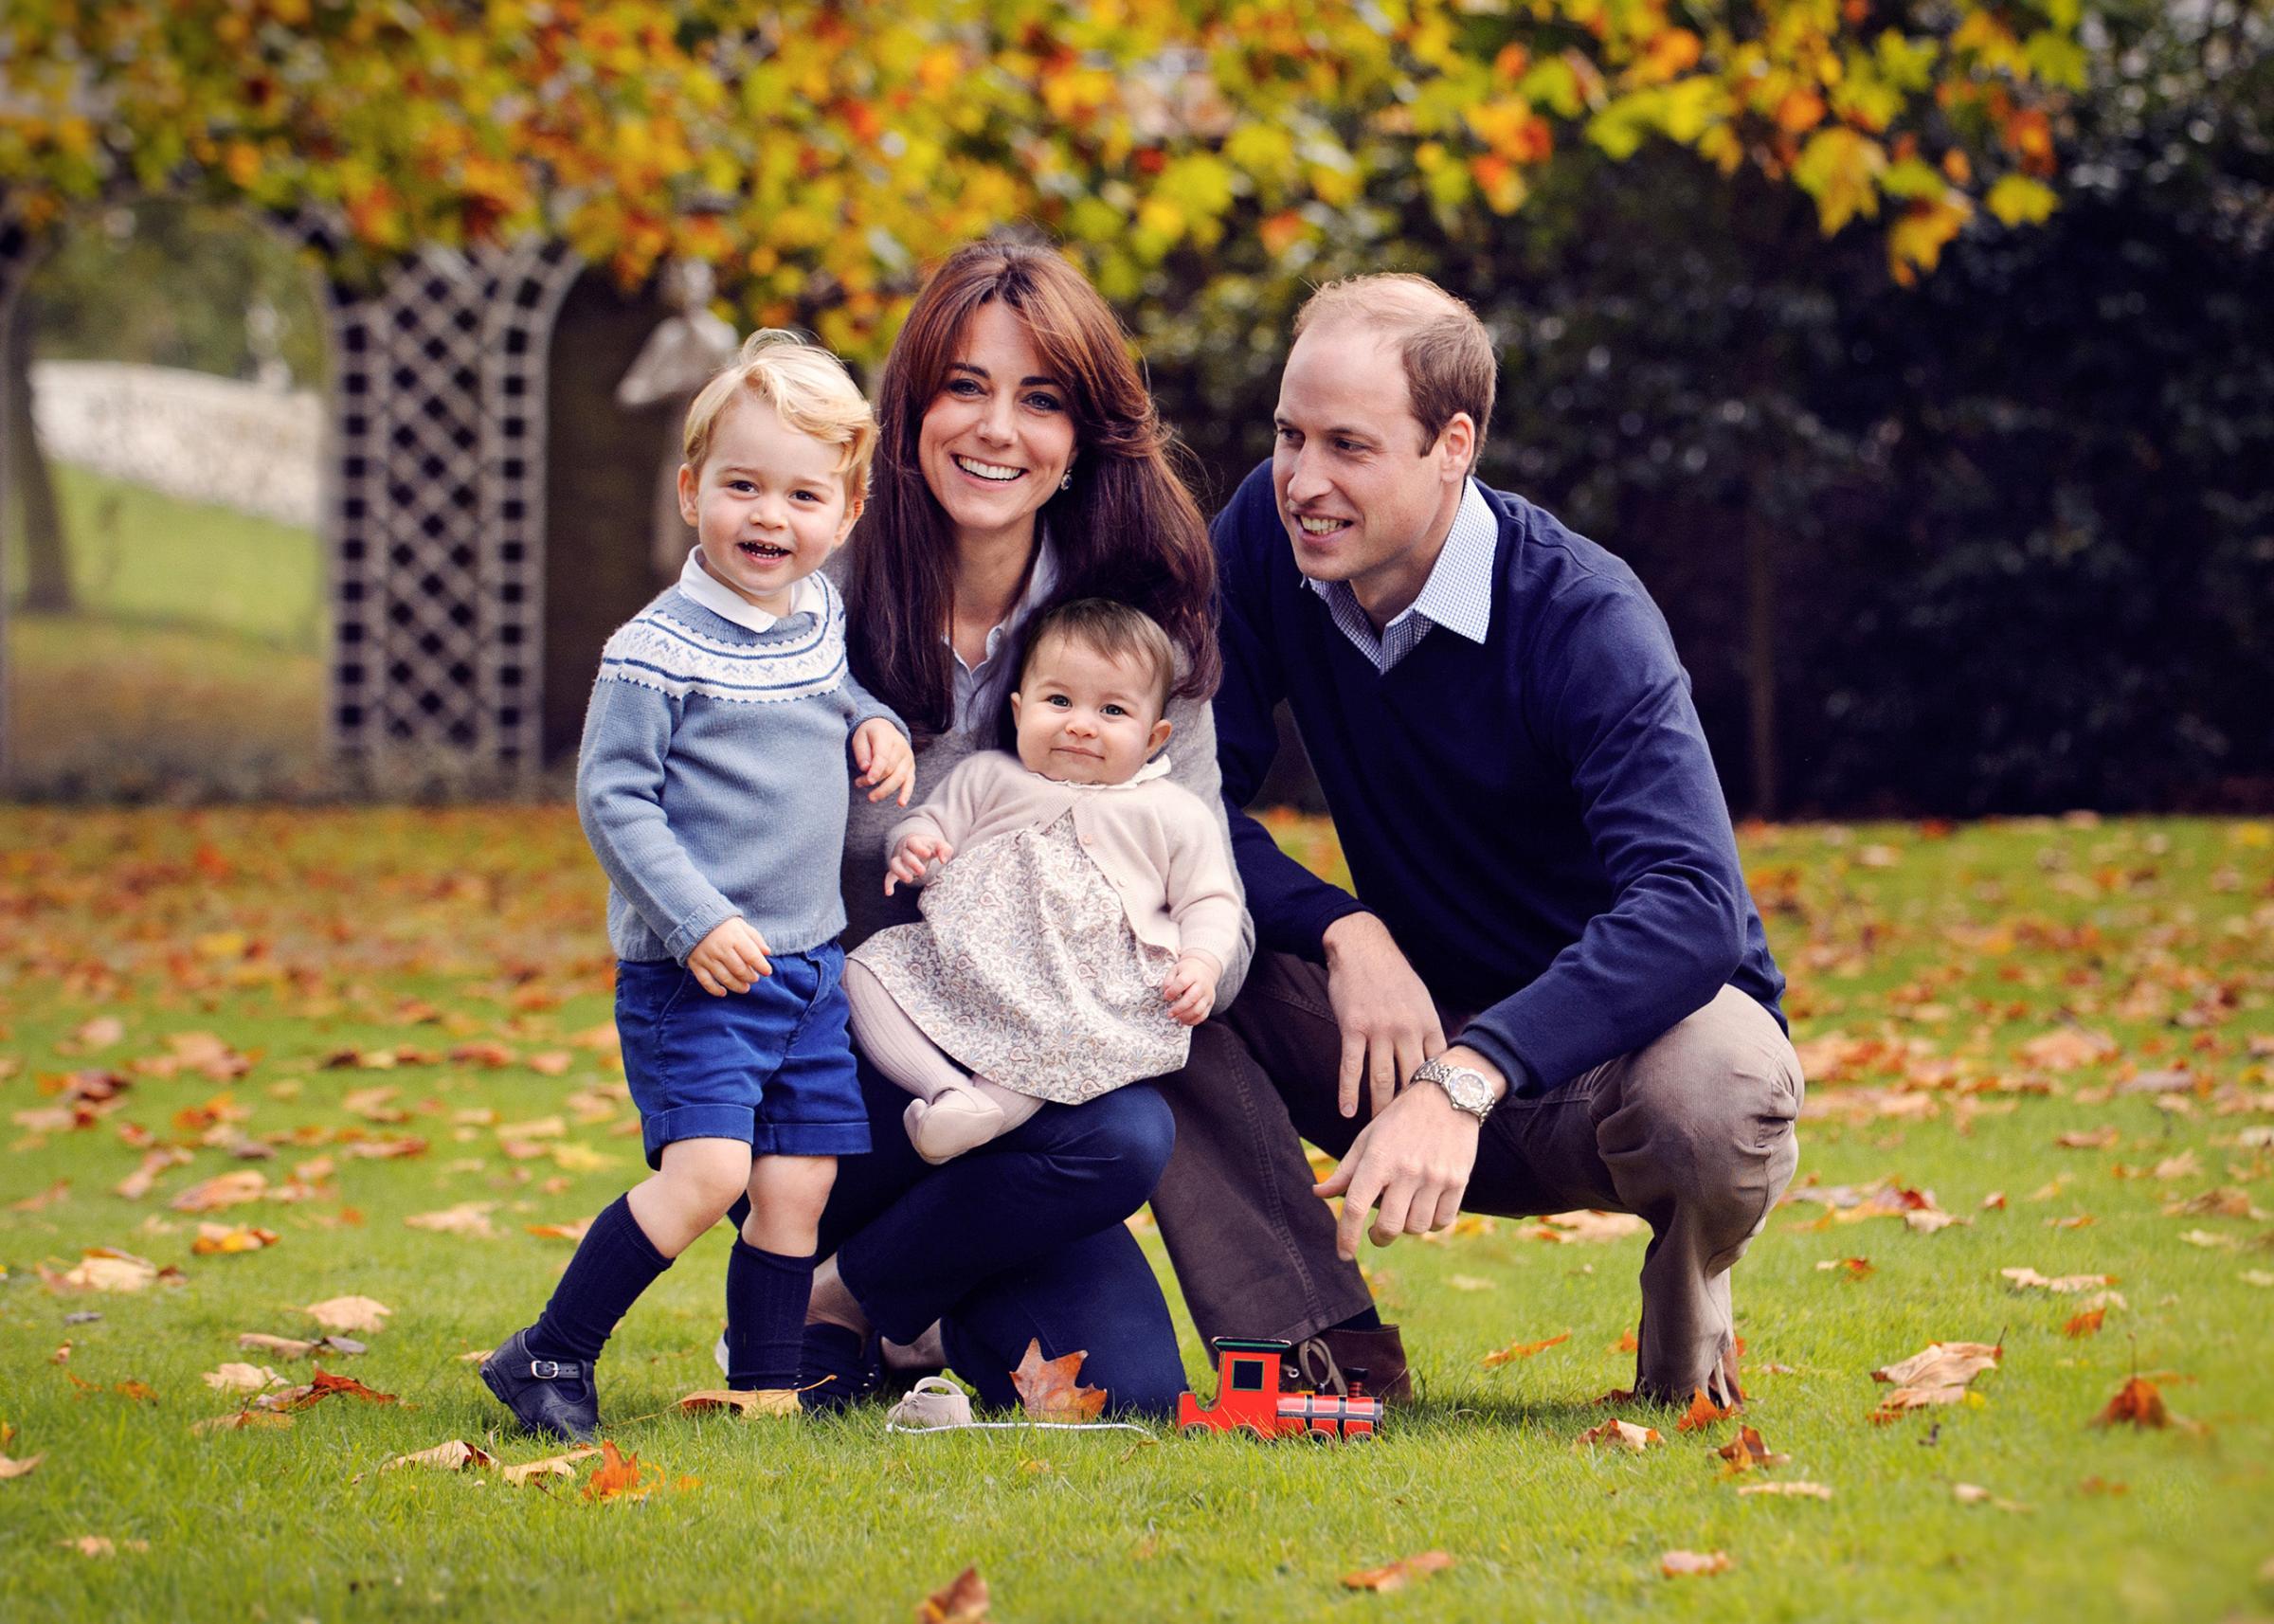 The Duke and Duchess of Cambridge with their two children, Prince George and Princess Charlotte, at Kensington Palace in London, Dec. 29, 2015.